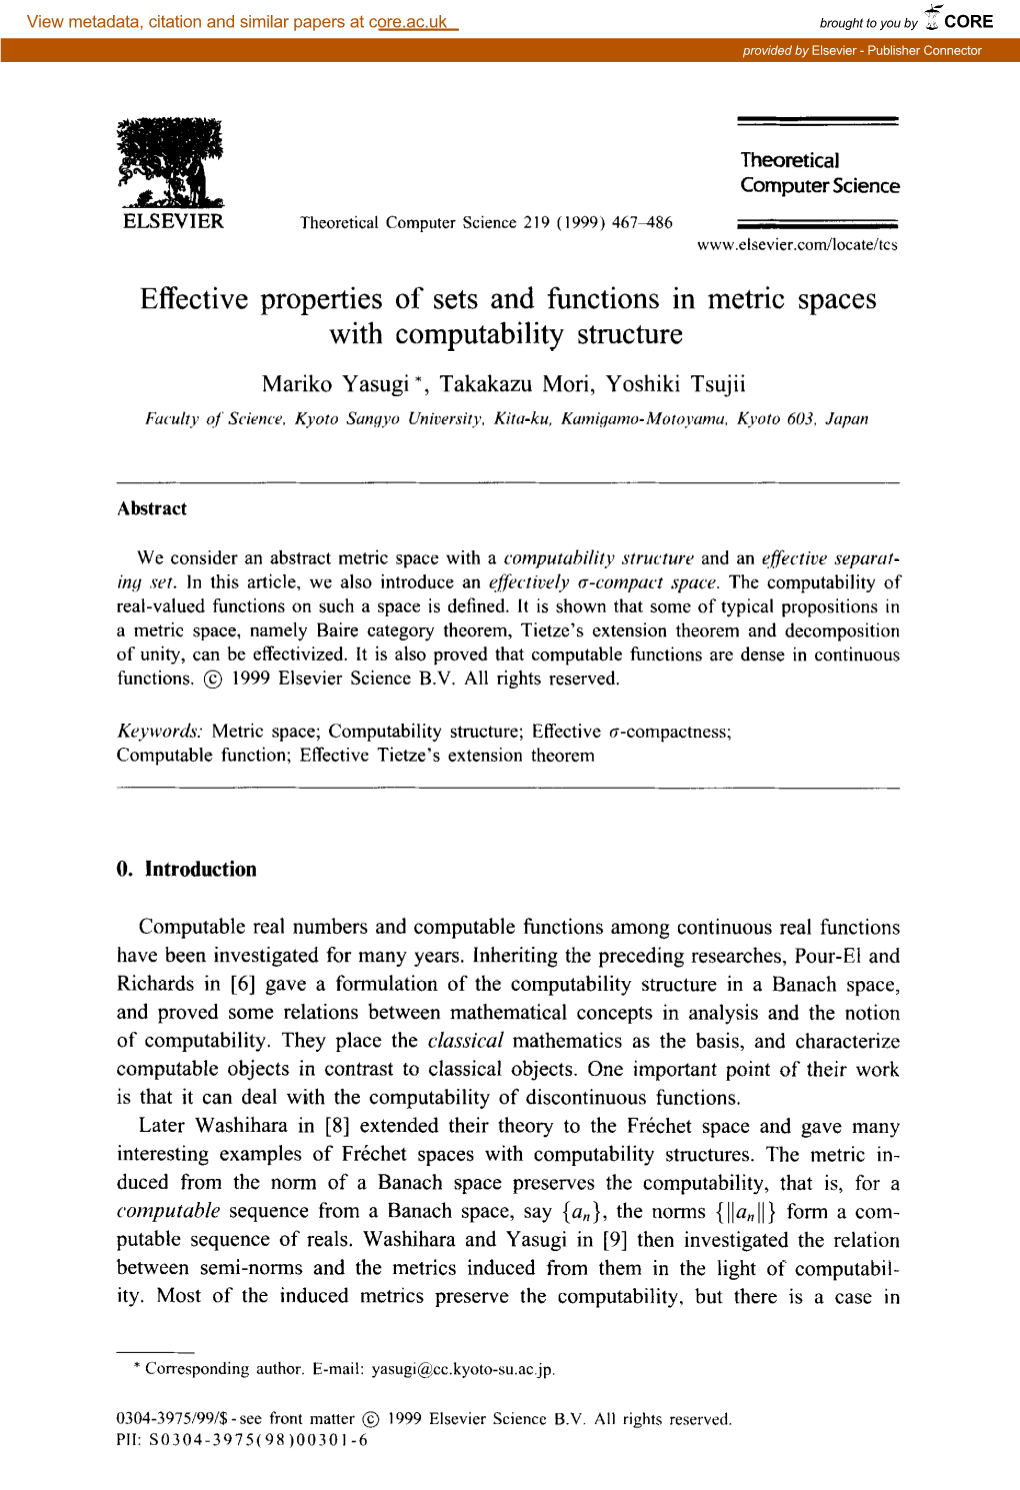 Effective Properties of Sets and Functions in Metric Spaces with Computability Structure